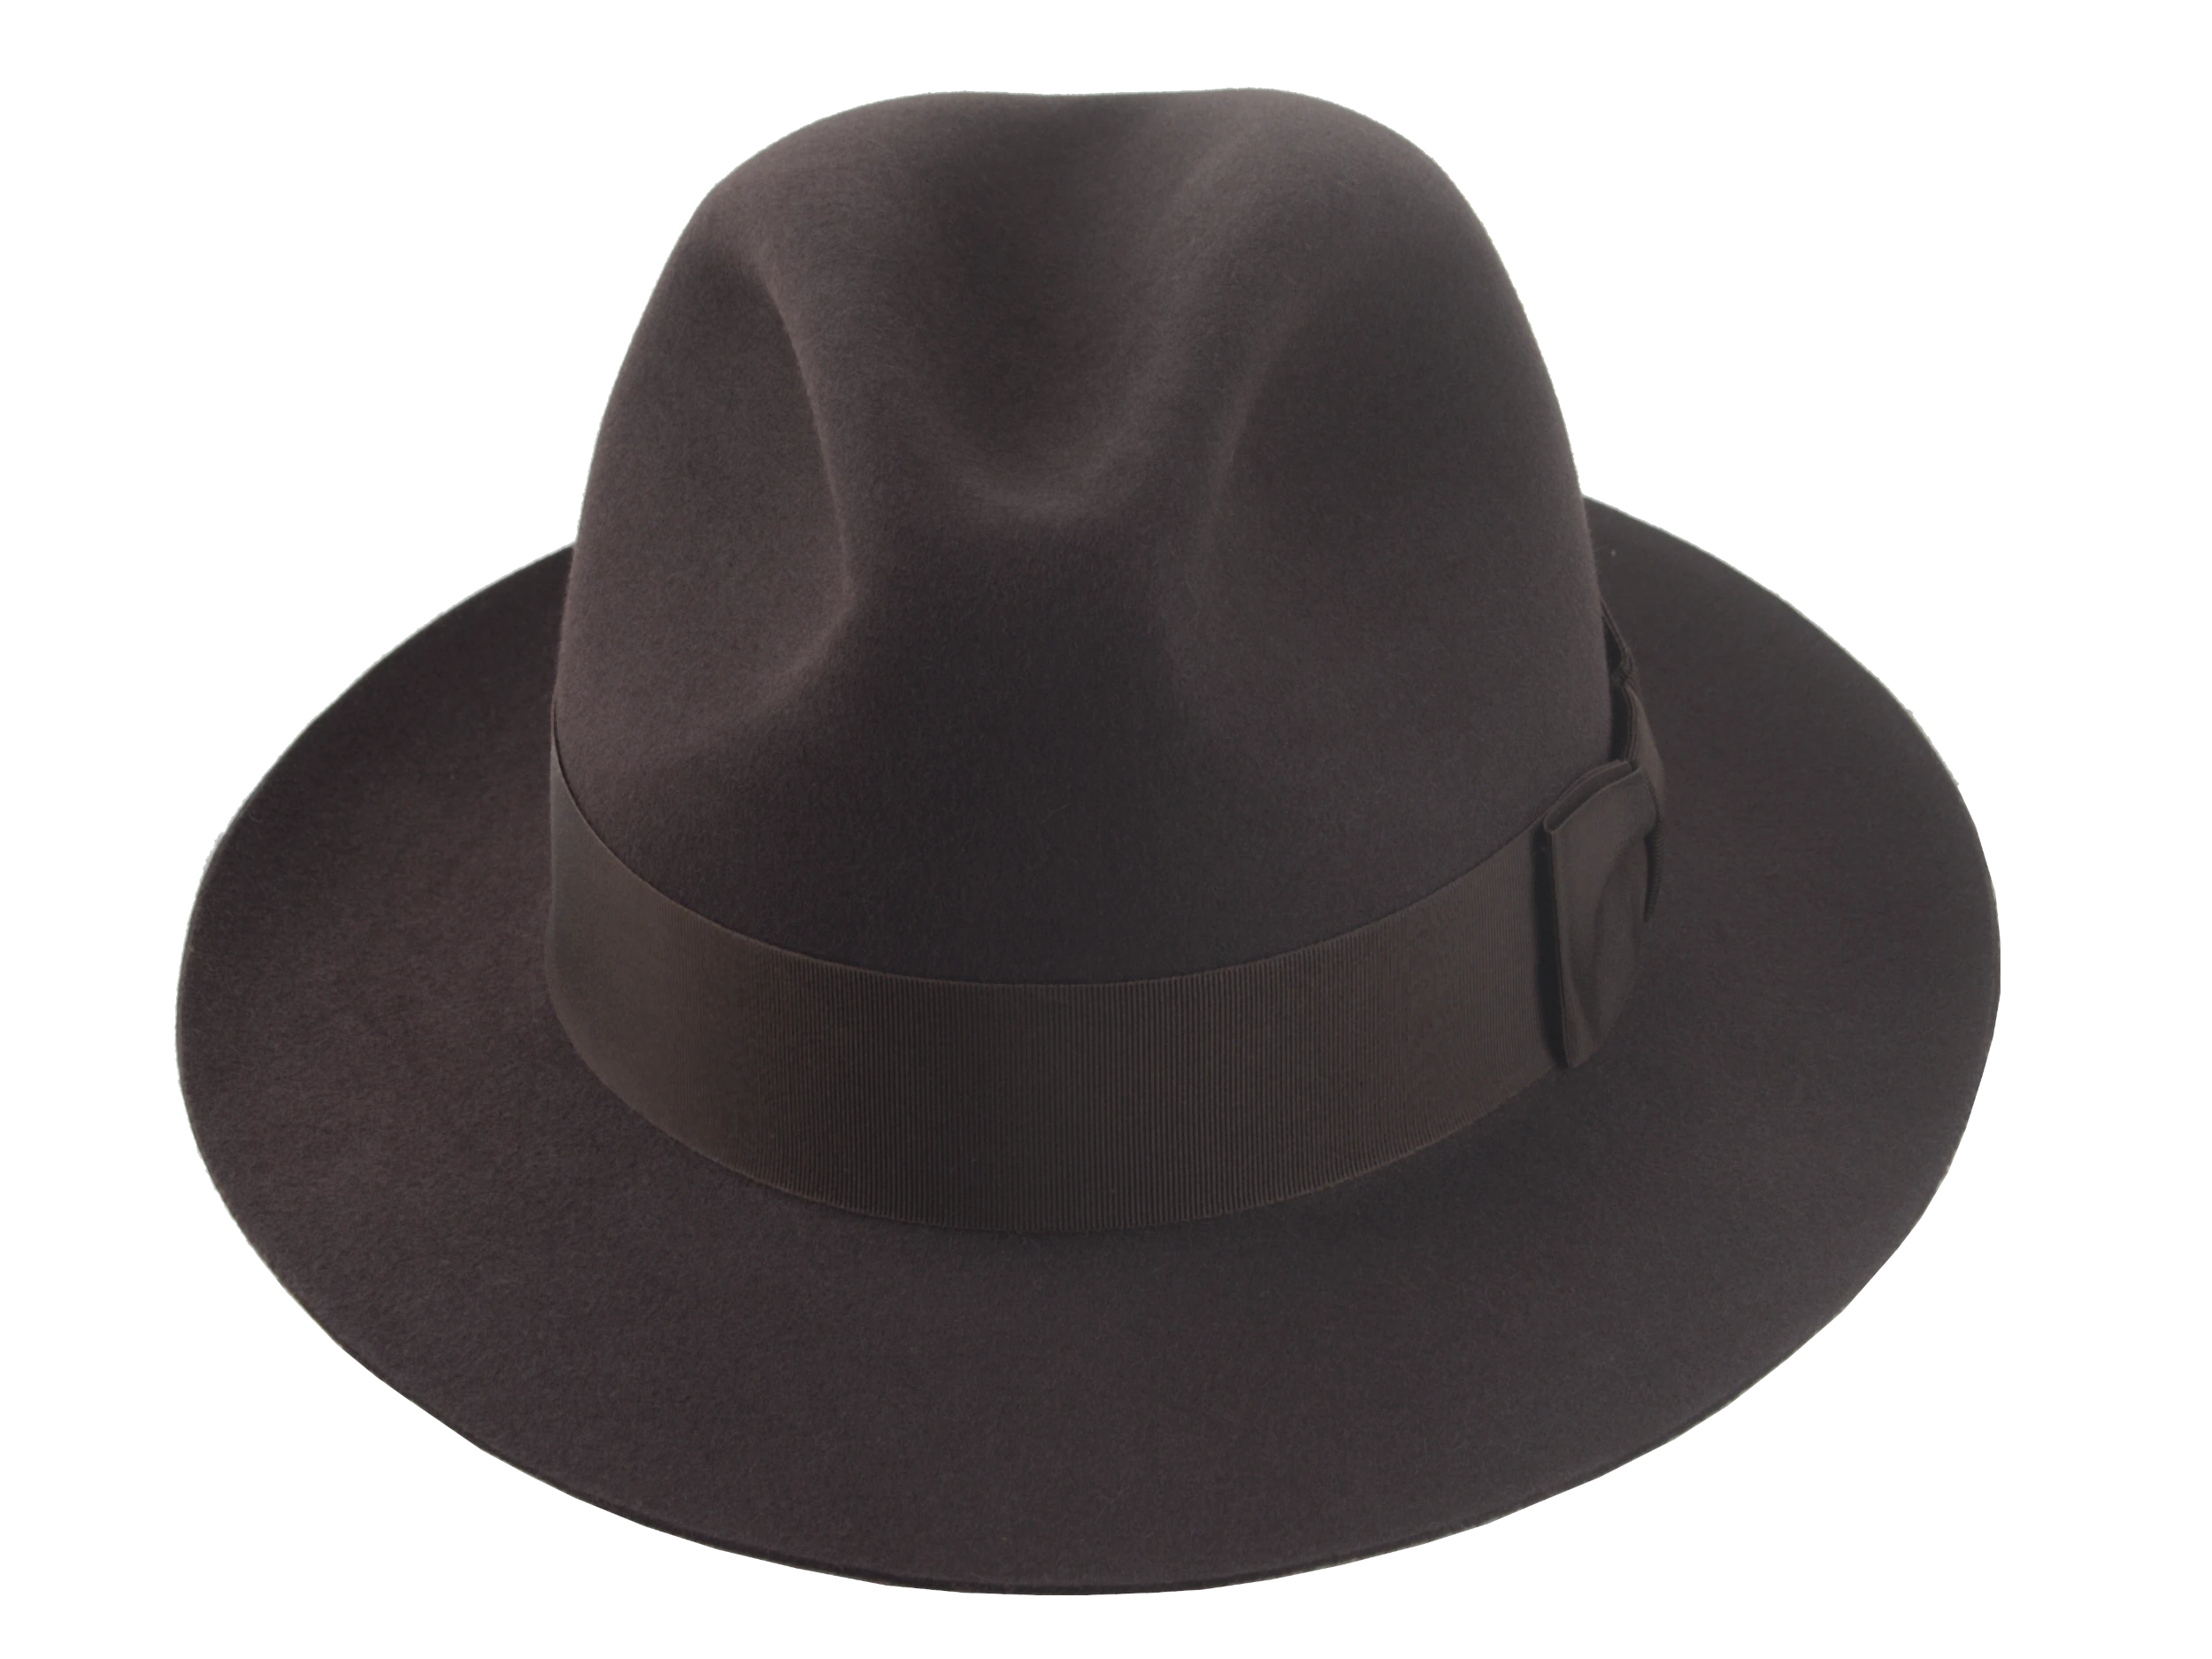 The Acropol: Full view of the fedora, highlighting its overall design and specifications | Agnoulita Hats